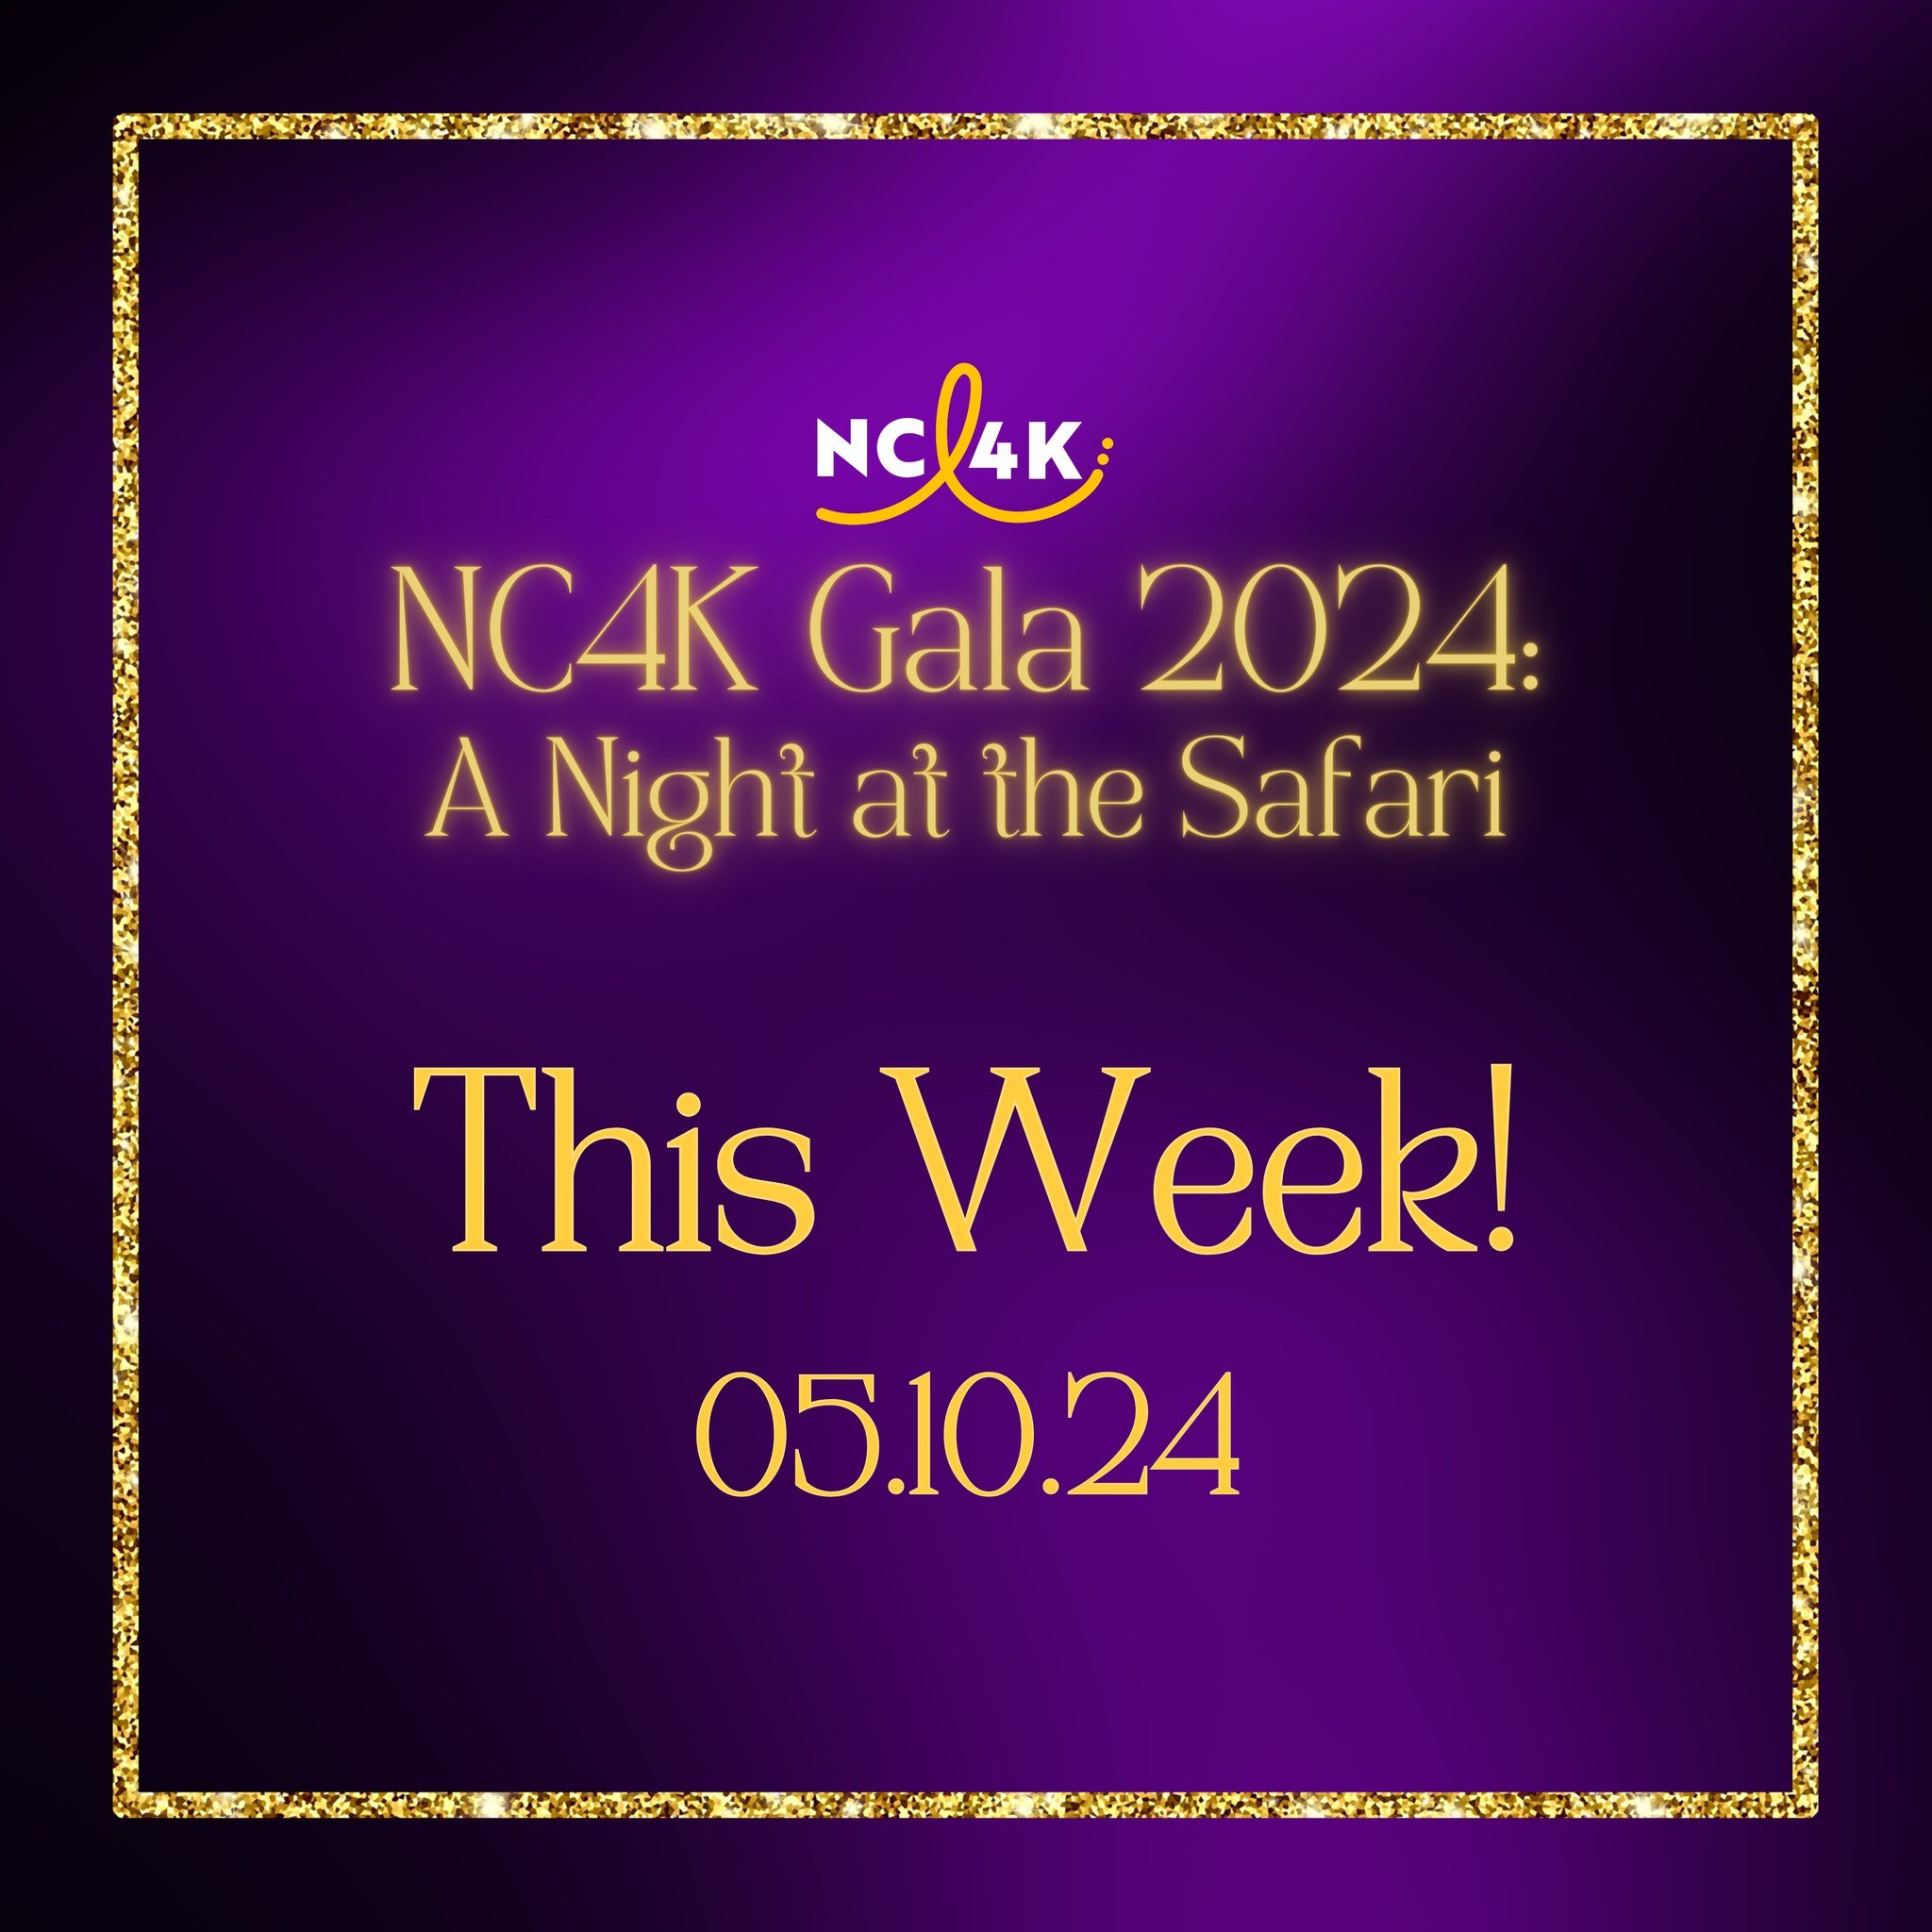 The 2024 NC4K Gala: A Night at the Safari will take place this Friday, May 10th. We are so excited to see everyone as we come together to support local kids and teens fighting cancer and their families. 
If you are attending, we have some important r